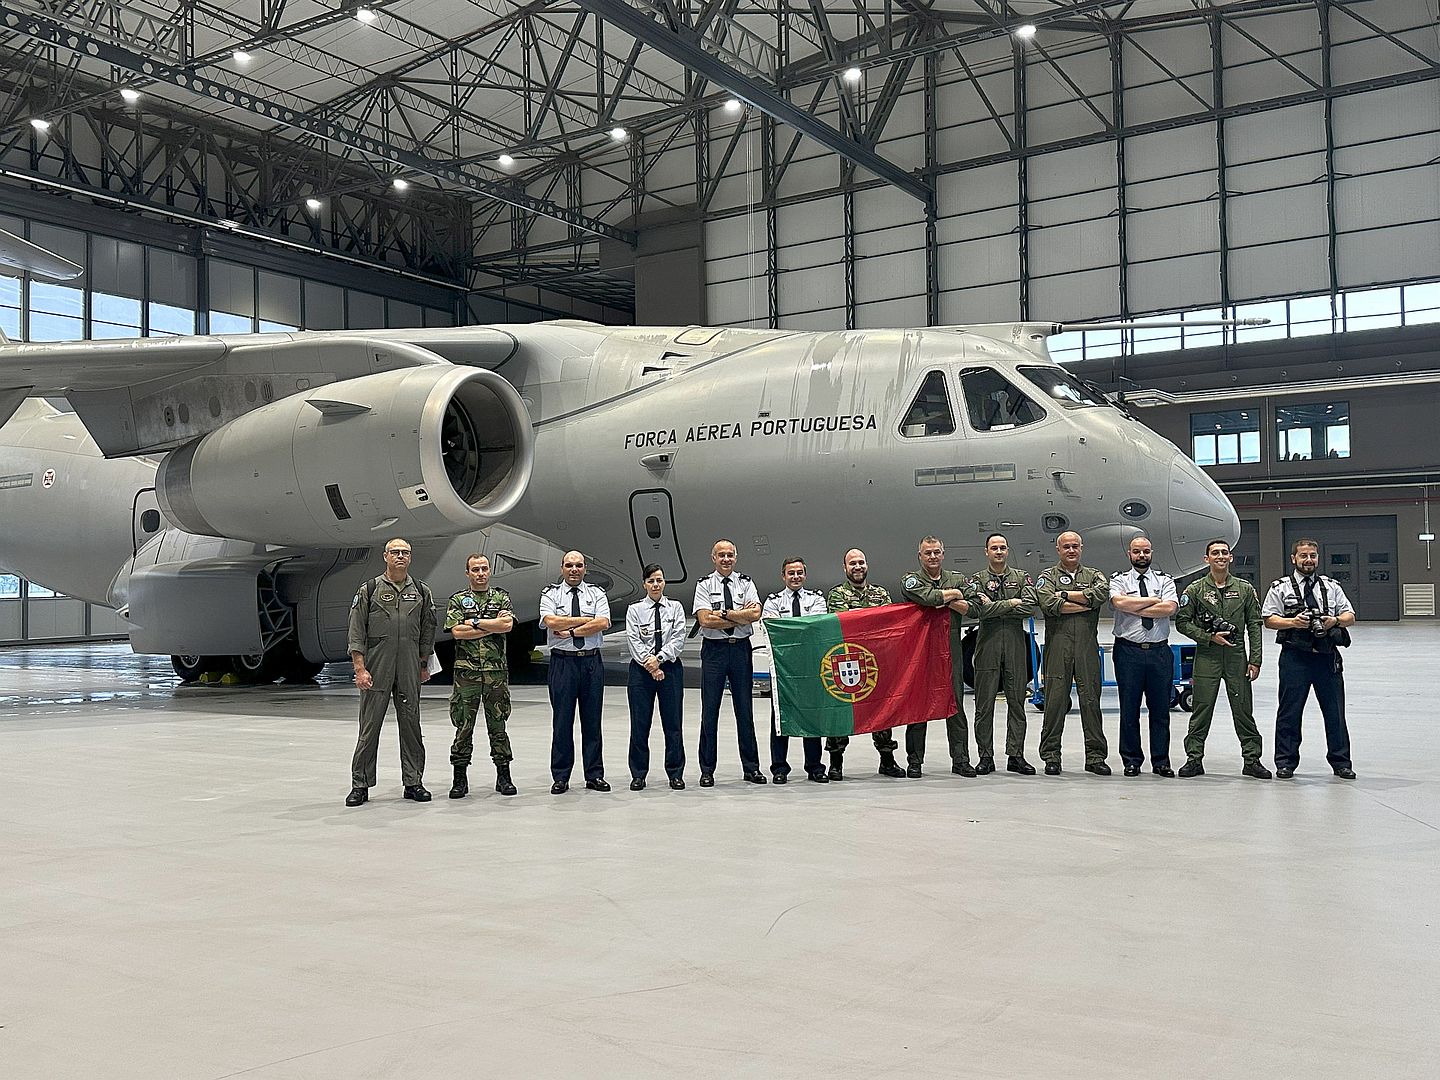 390 Millennium In NATO Configuration Enters Into Service With The Portuguese Air Force